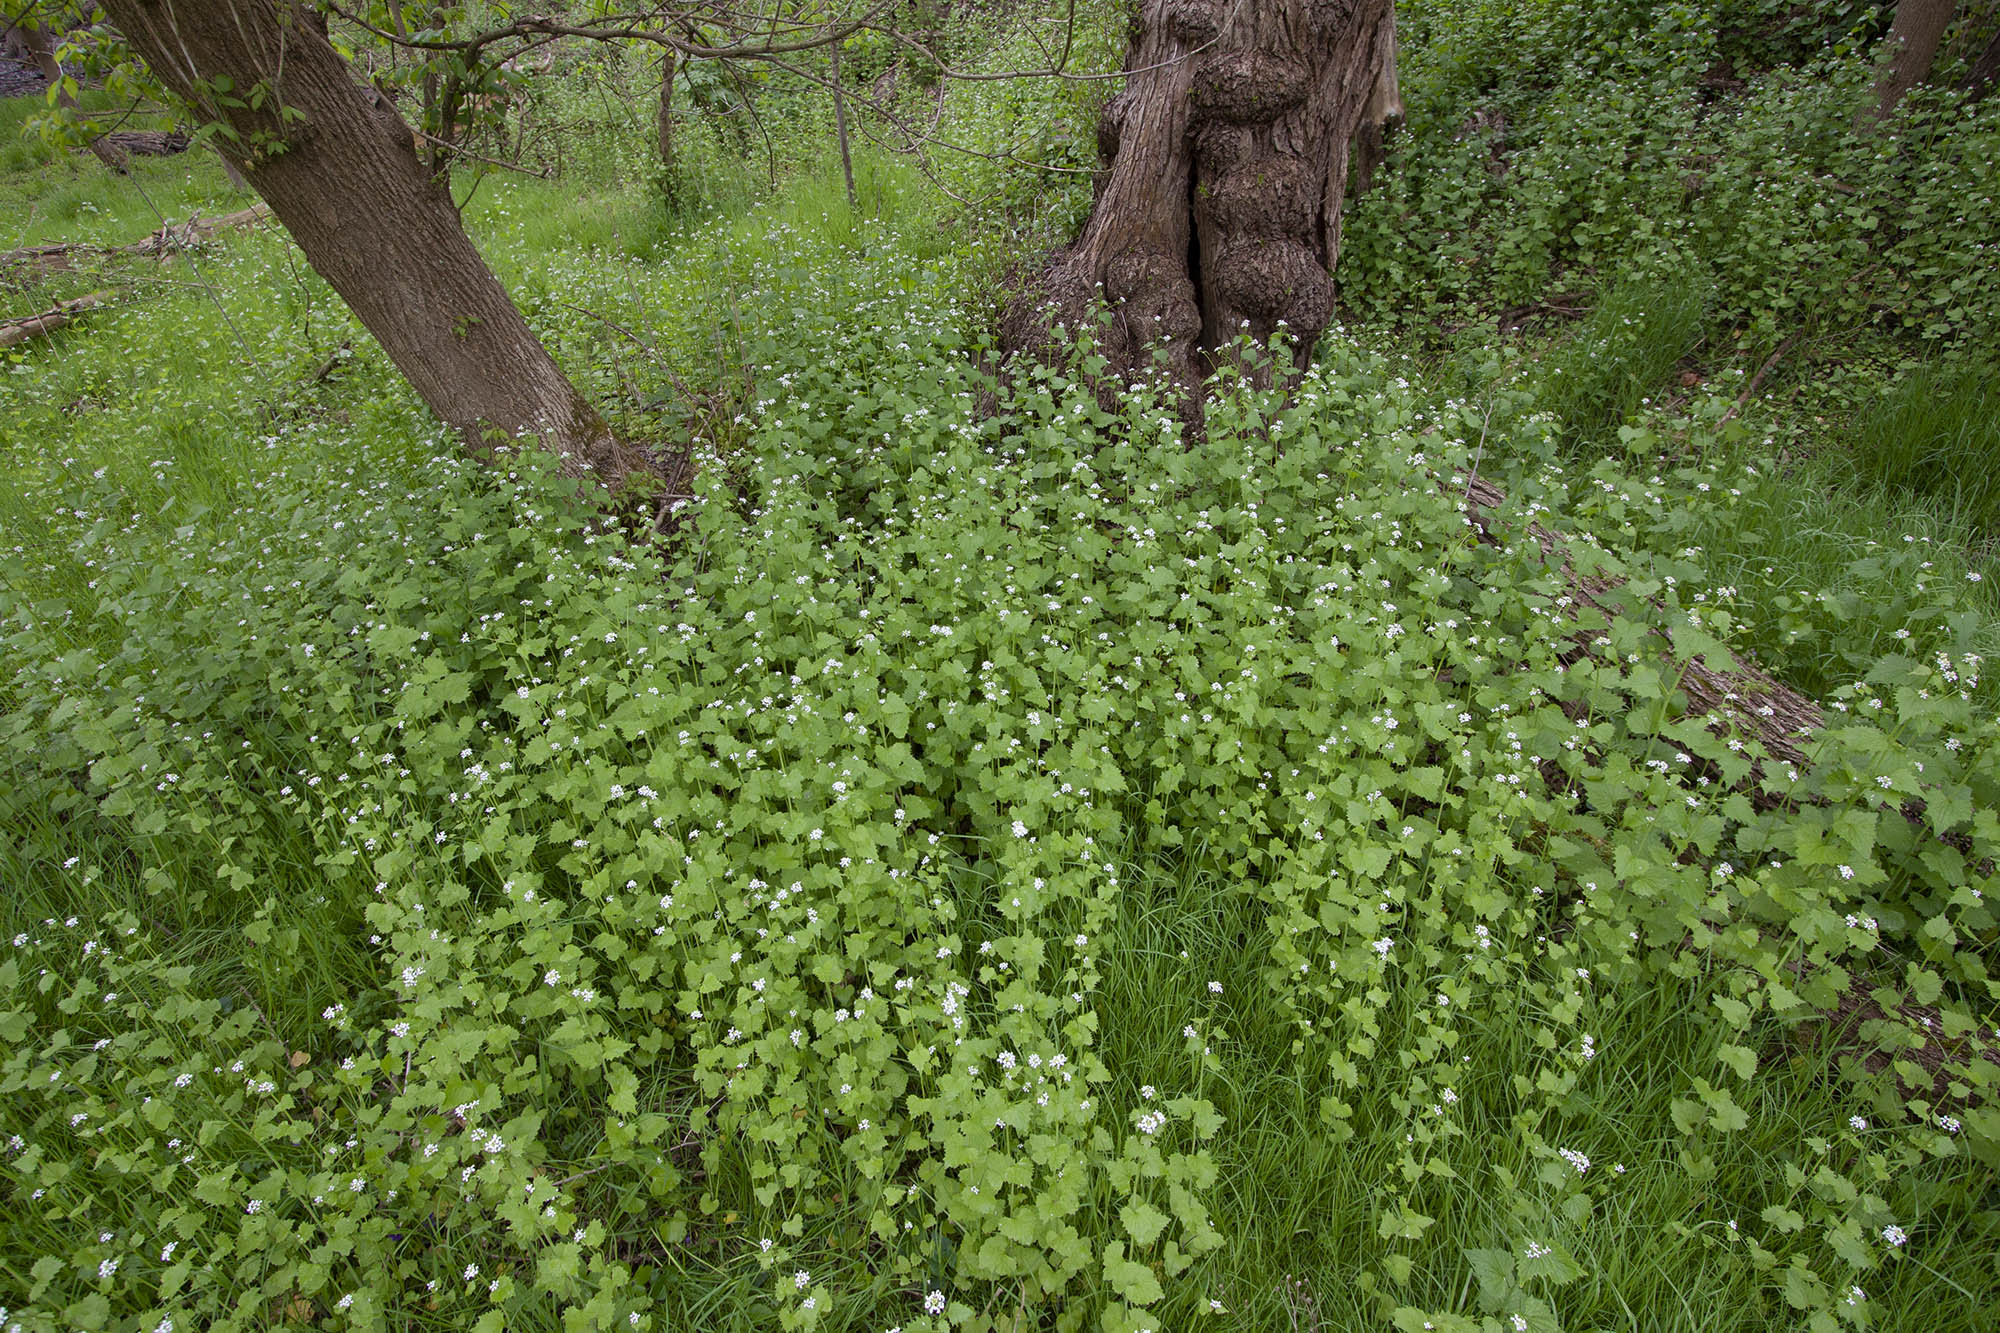 A field of garlic mustard overtakes the forest floor.